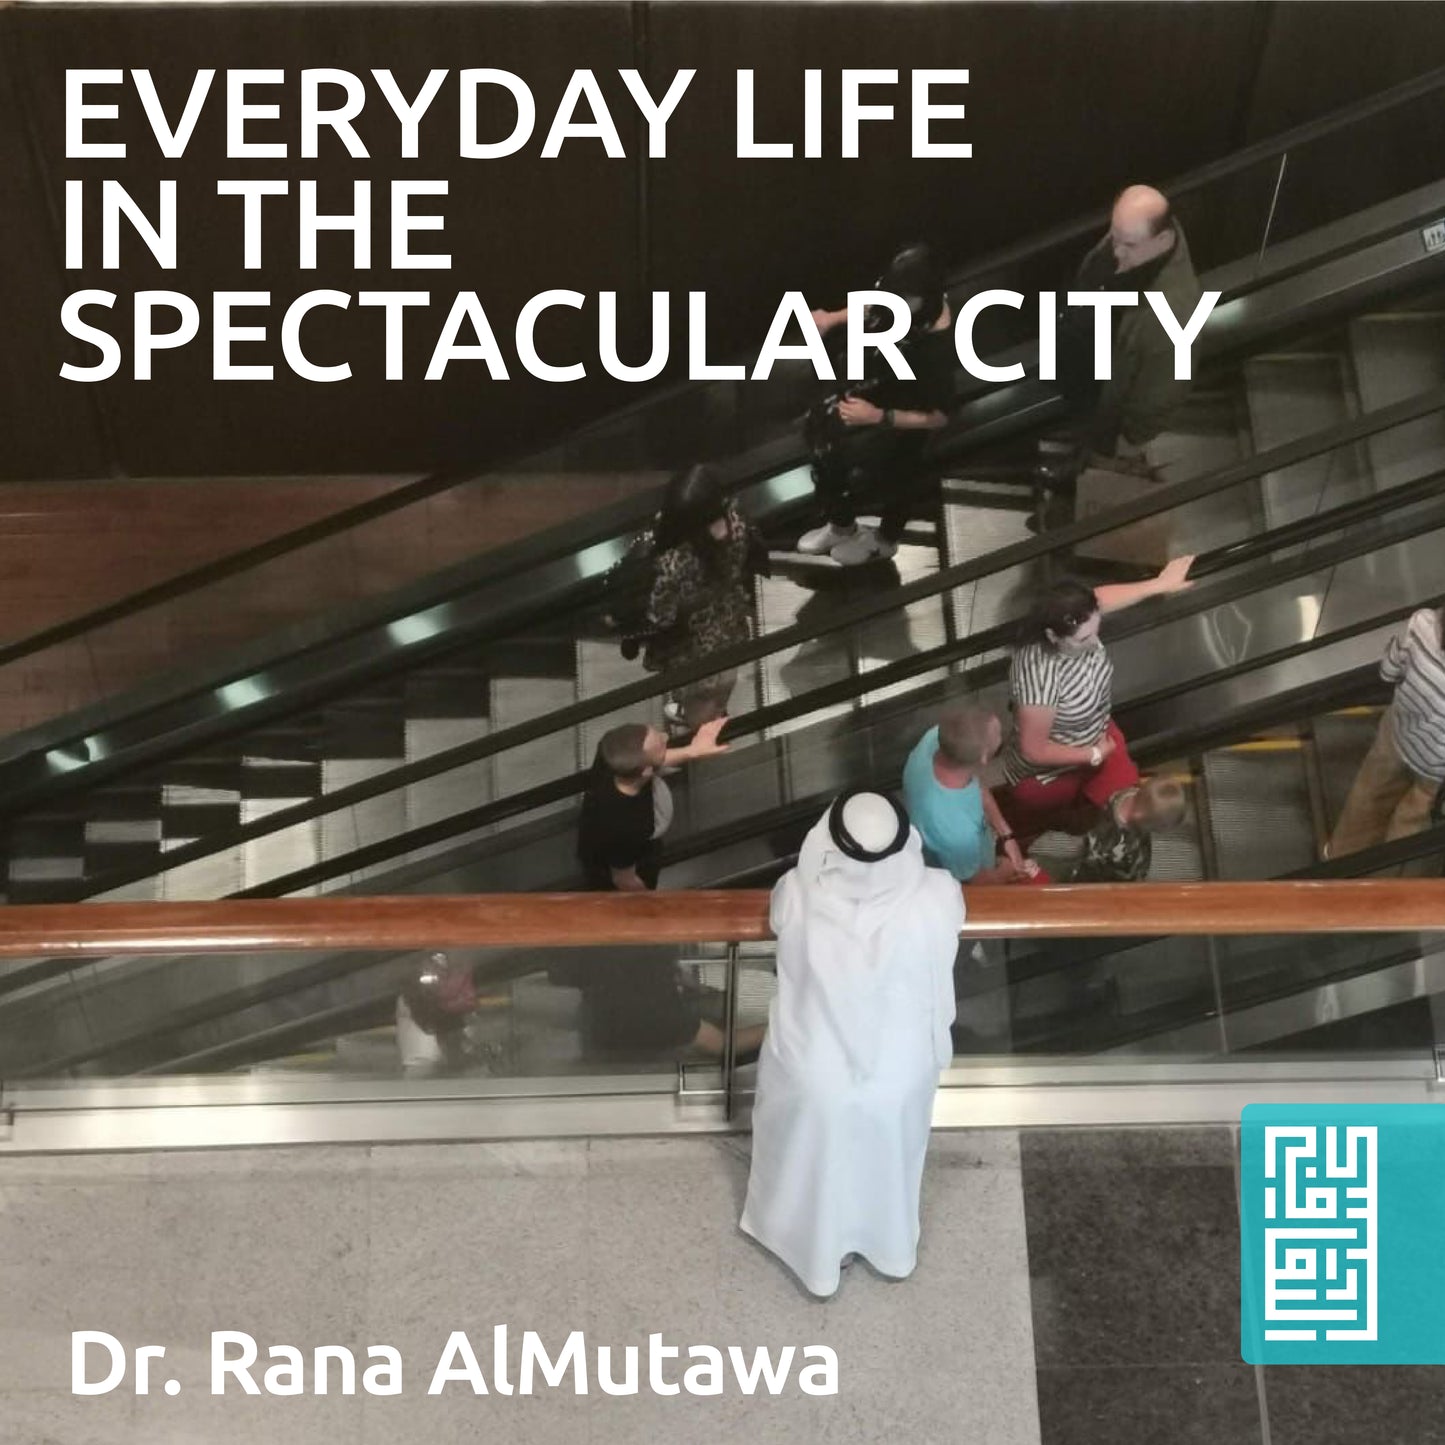 A Walk and Talk with Author Rana AlMutawa about Her Exhibit "Everyday Life in the Spectacular City"